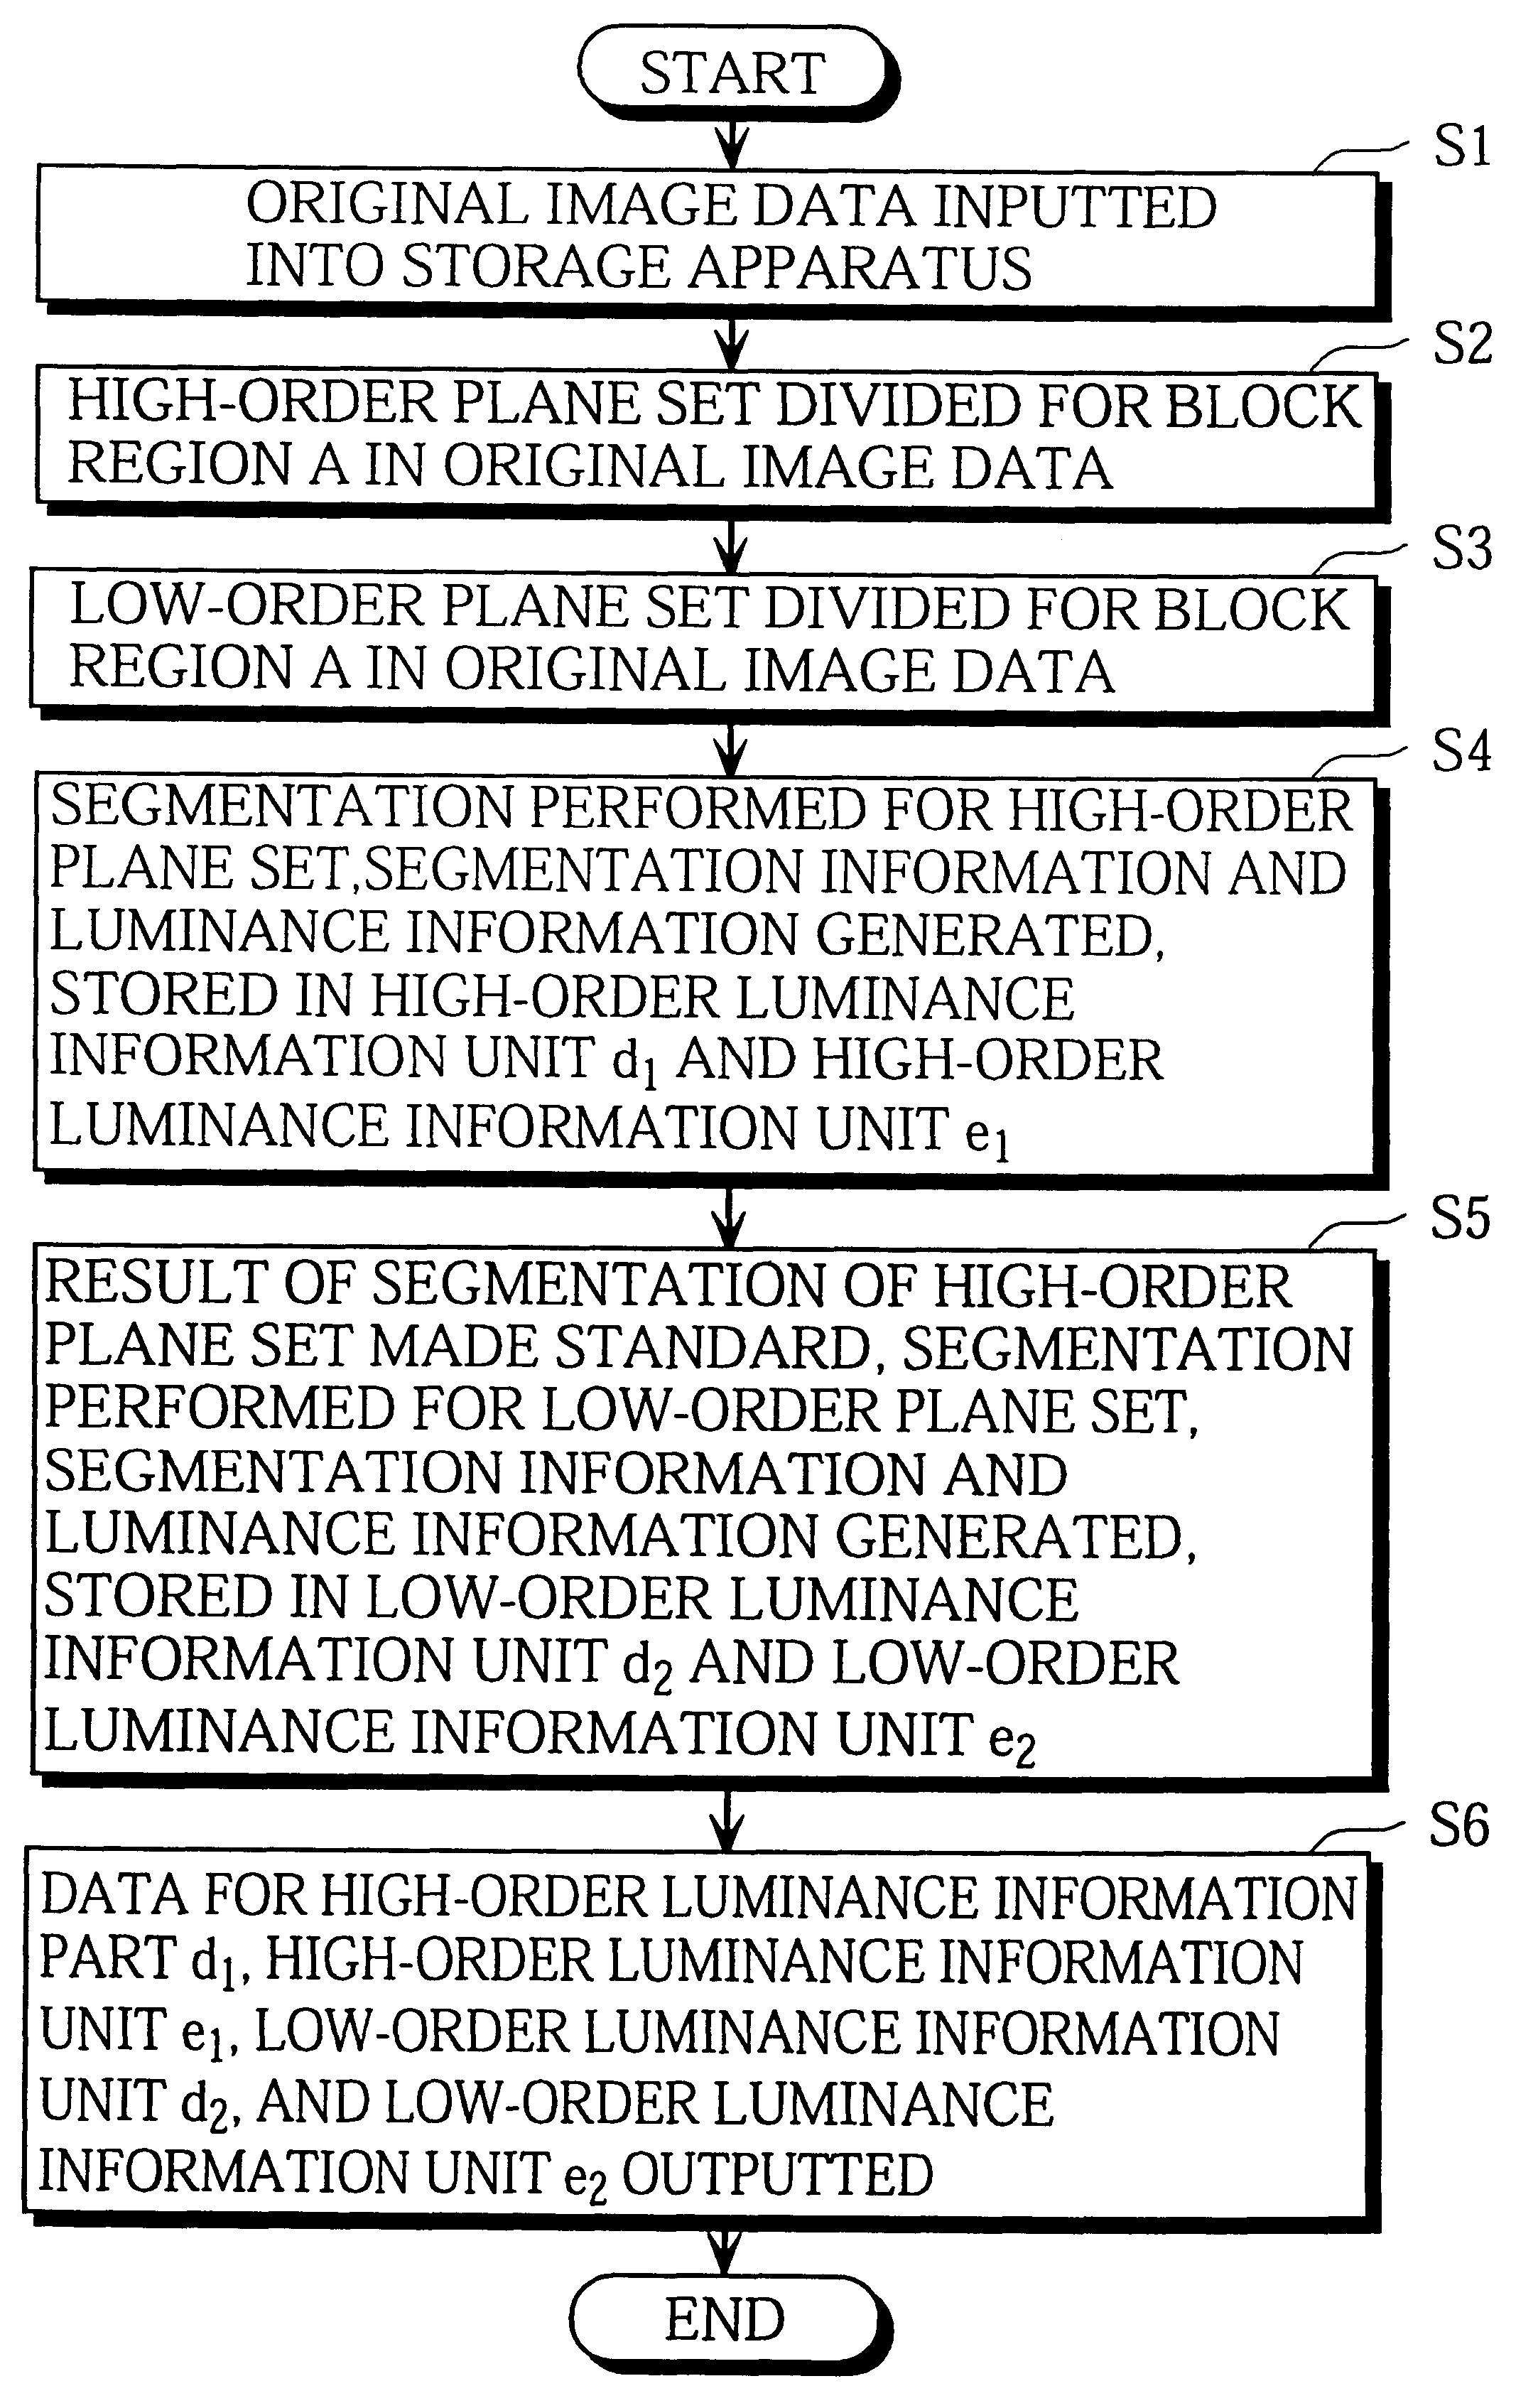 Image compression apparatus and decoding apparatus suited to lossless image compression